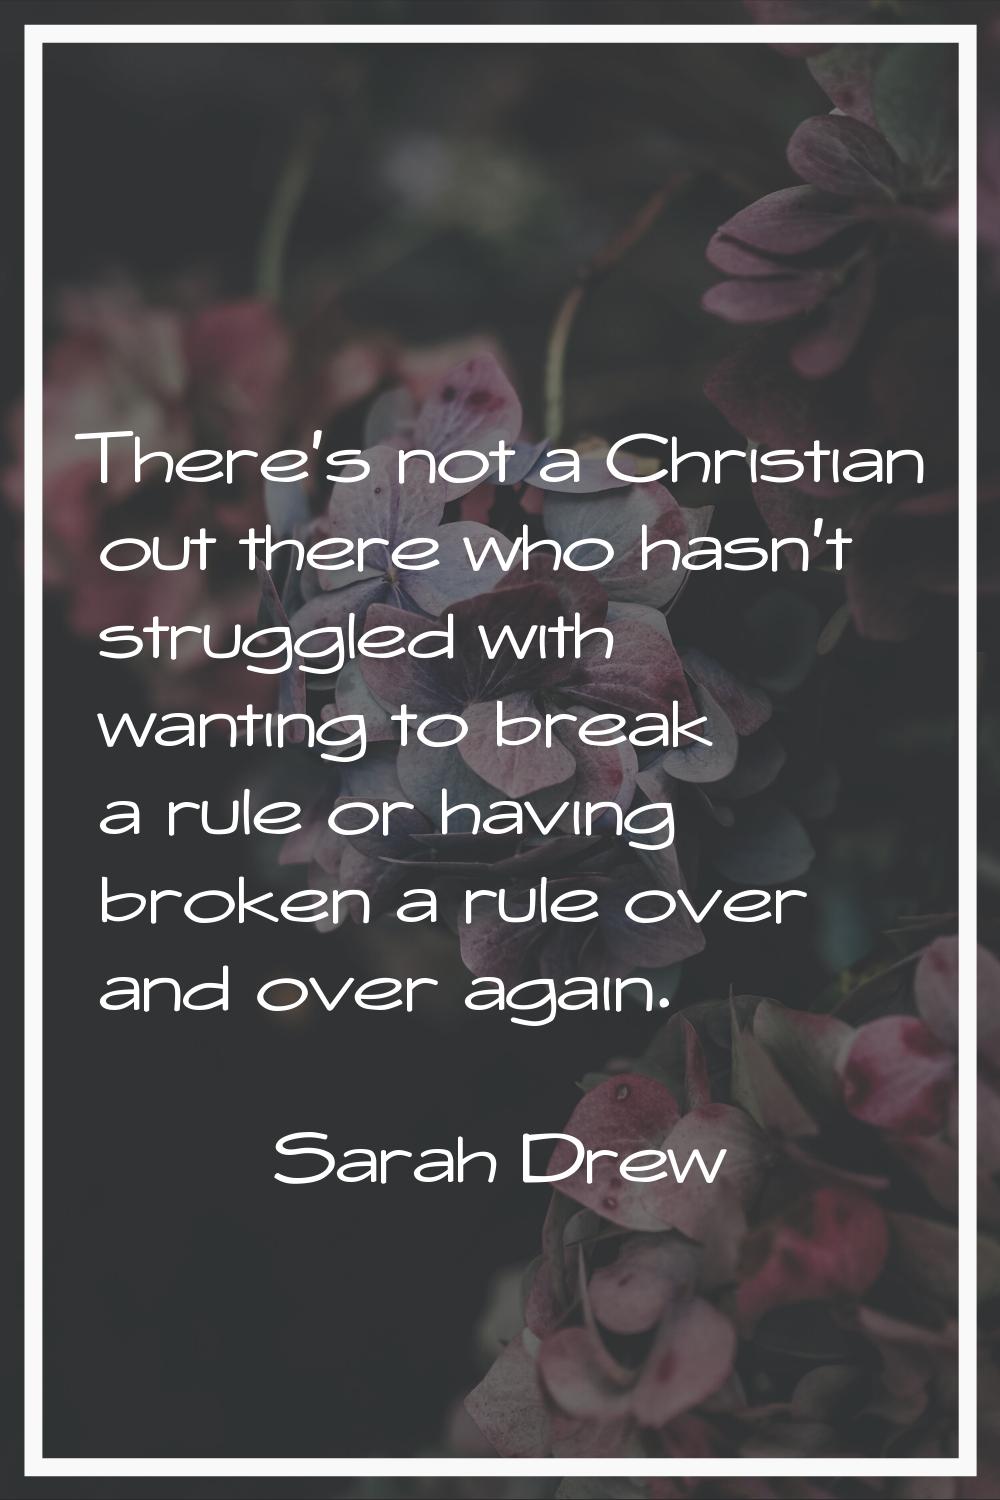 There's not a Christian out there who hasn't struggled with wanting to break a rule or having broke